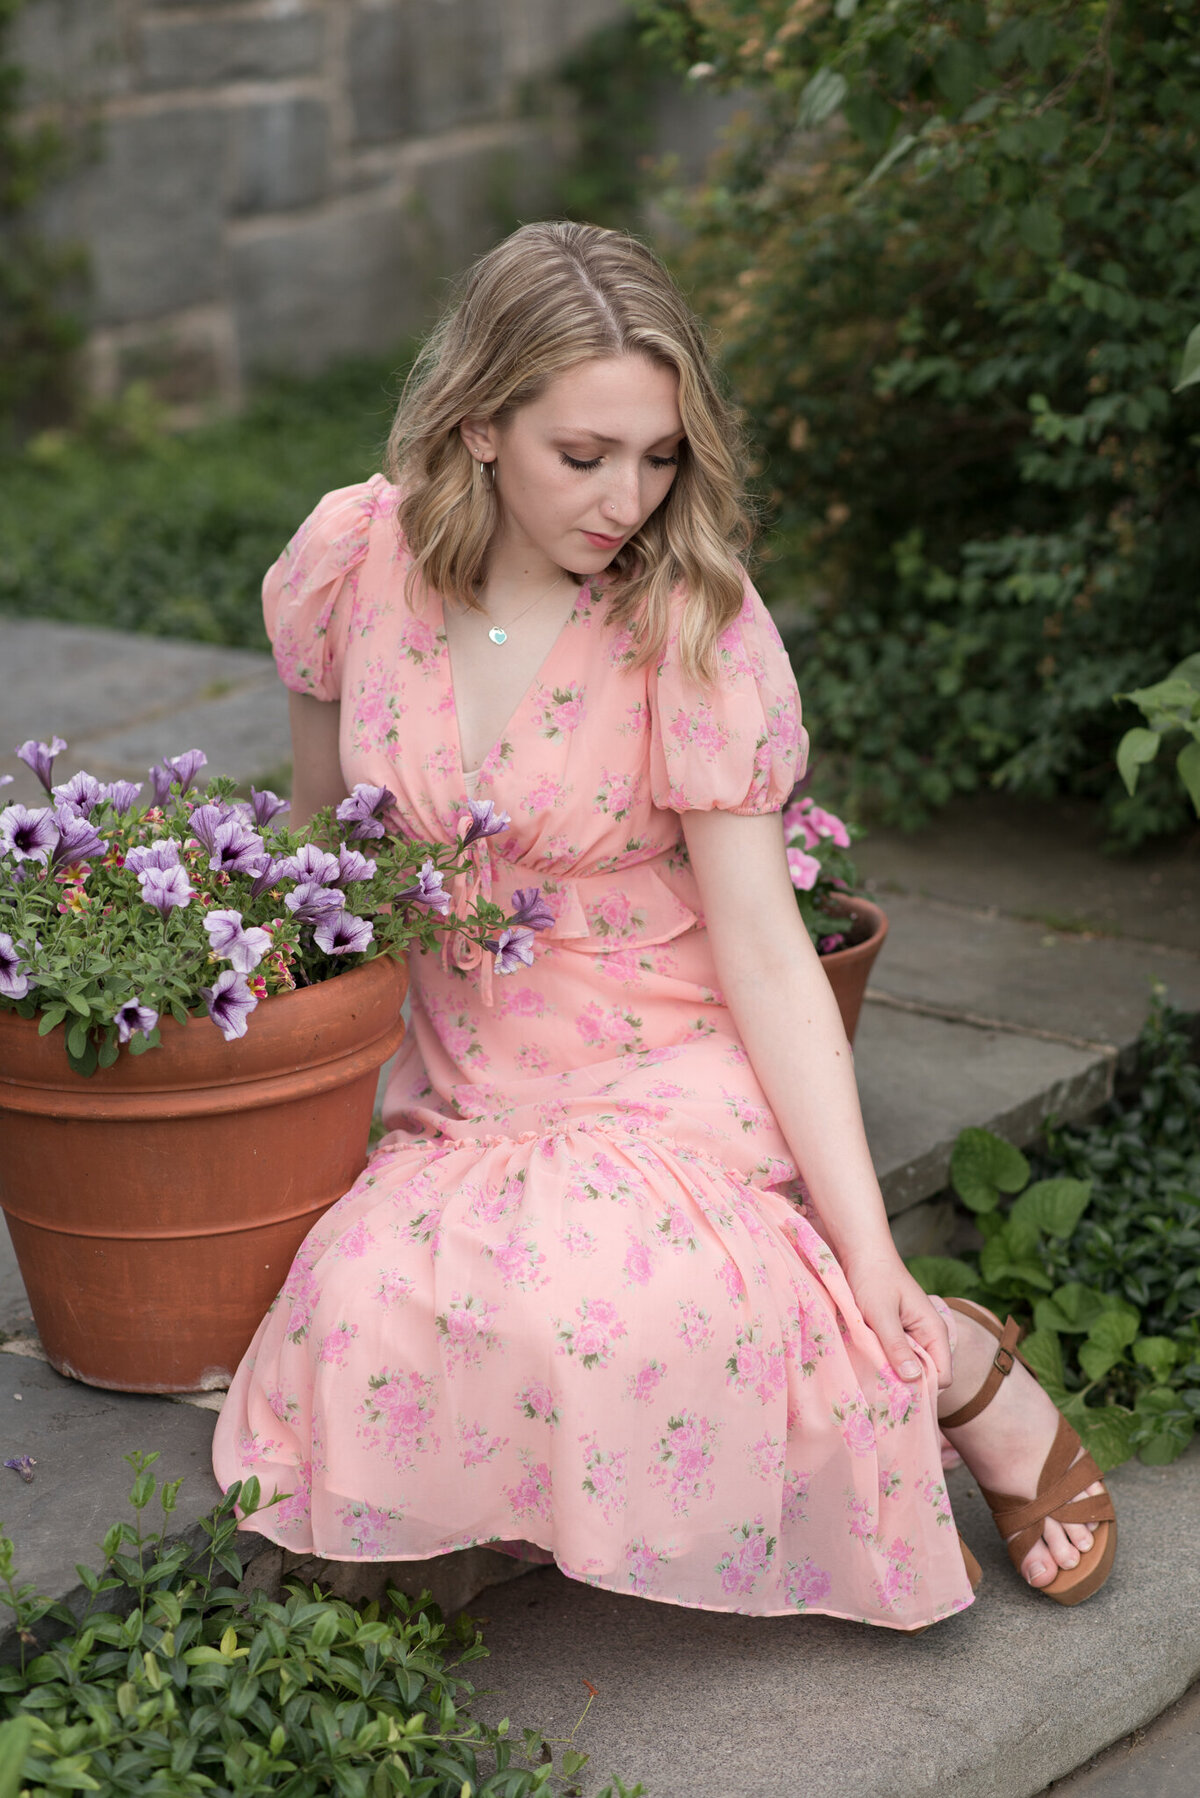 Girl in pink dress, looking down at her feet in garden